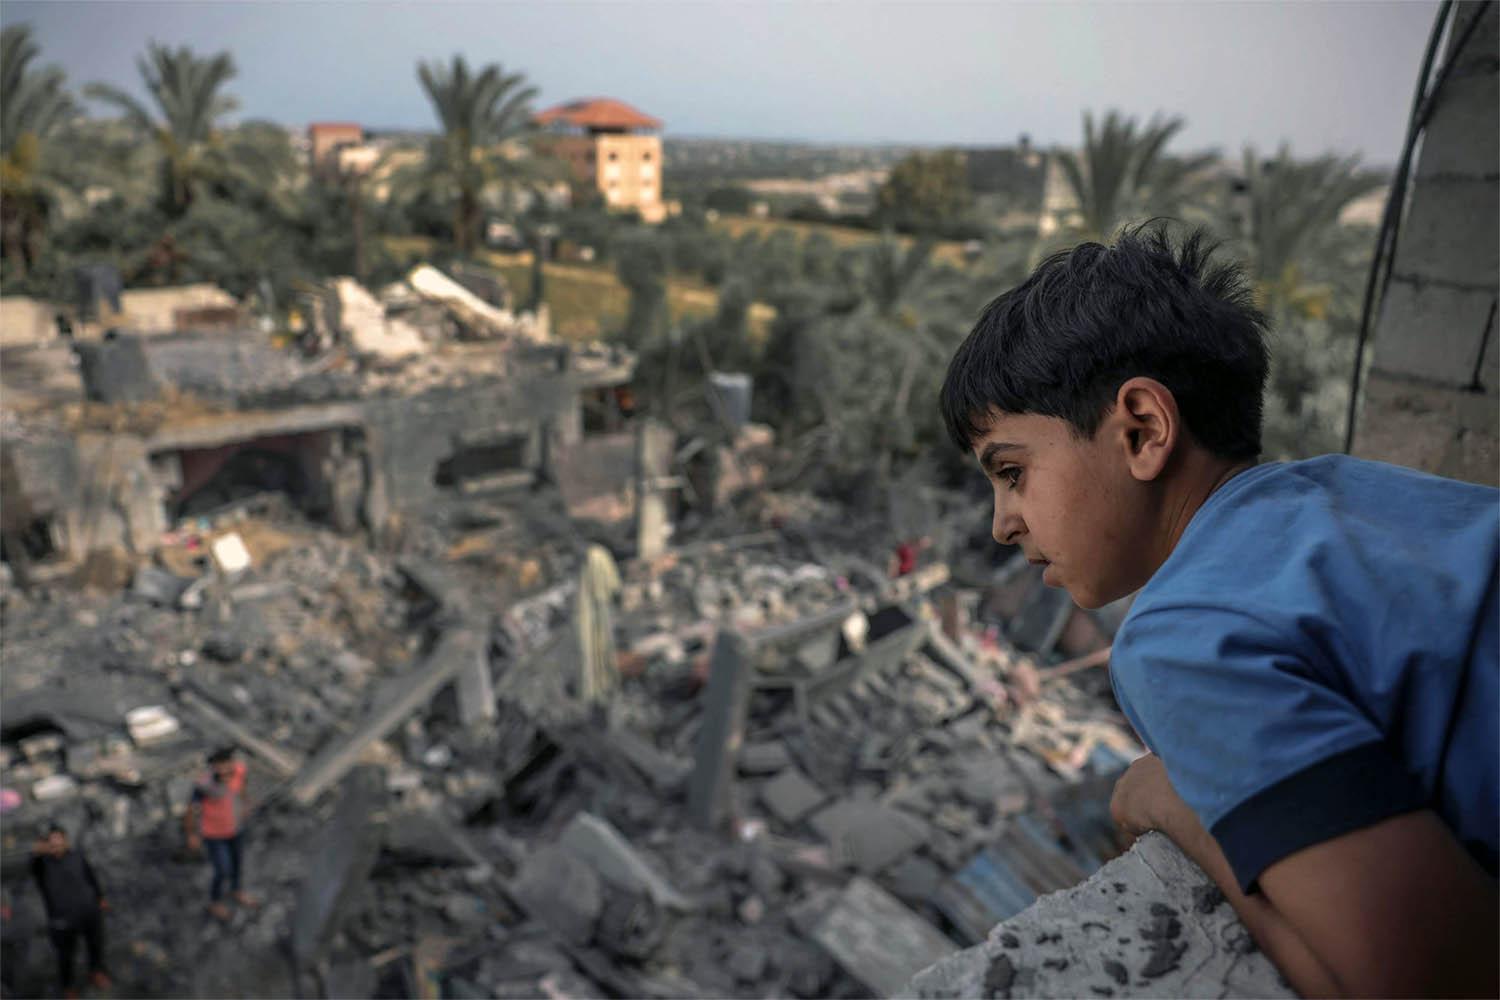 A child watches from a window as people sift through the rubble of a building hit in an Israeli air strike in Biet Hanoun